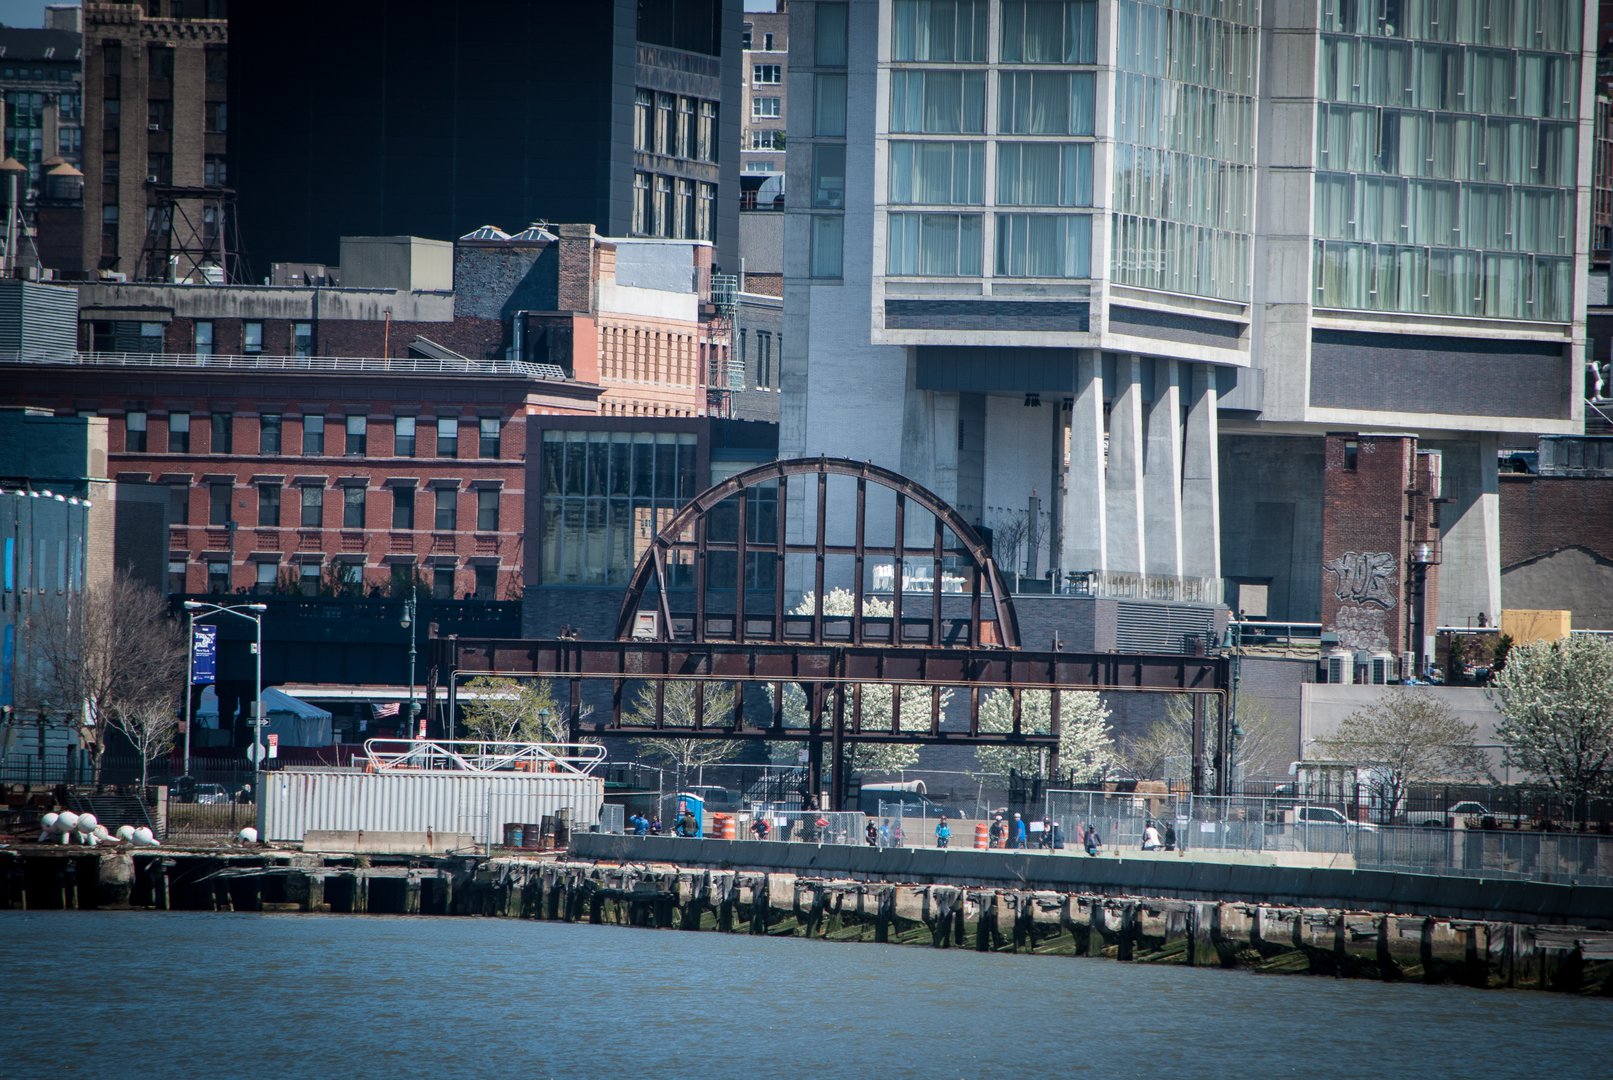 Pier 54 And Its Many Tragedies